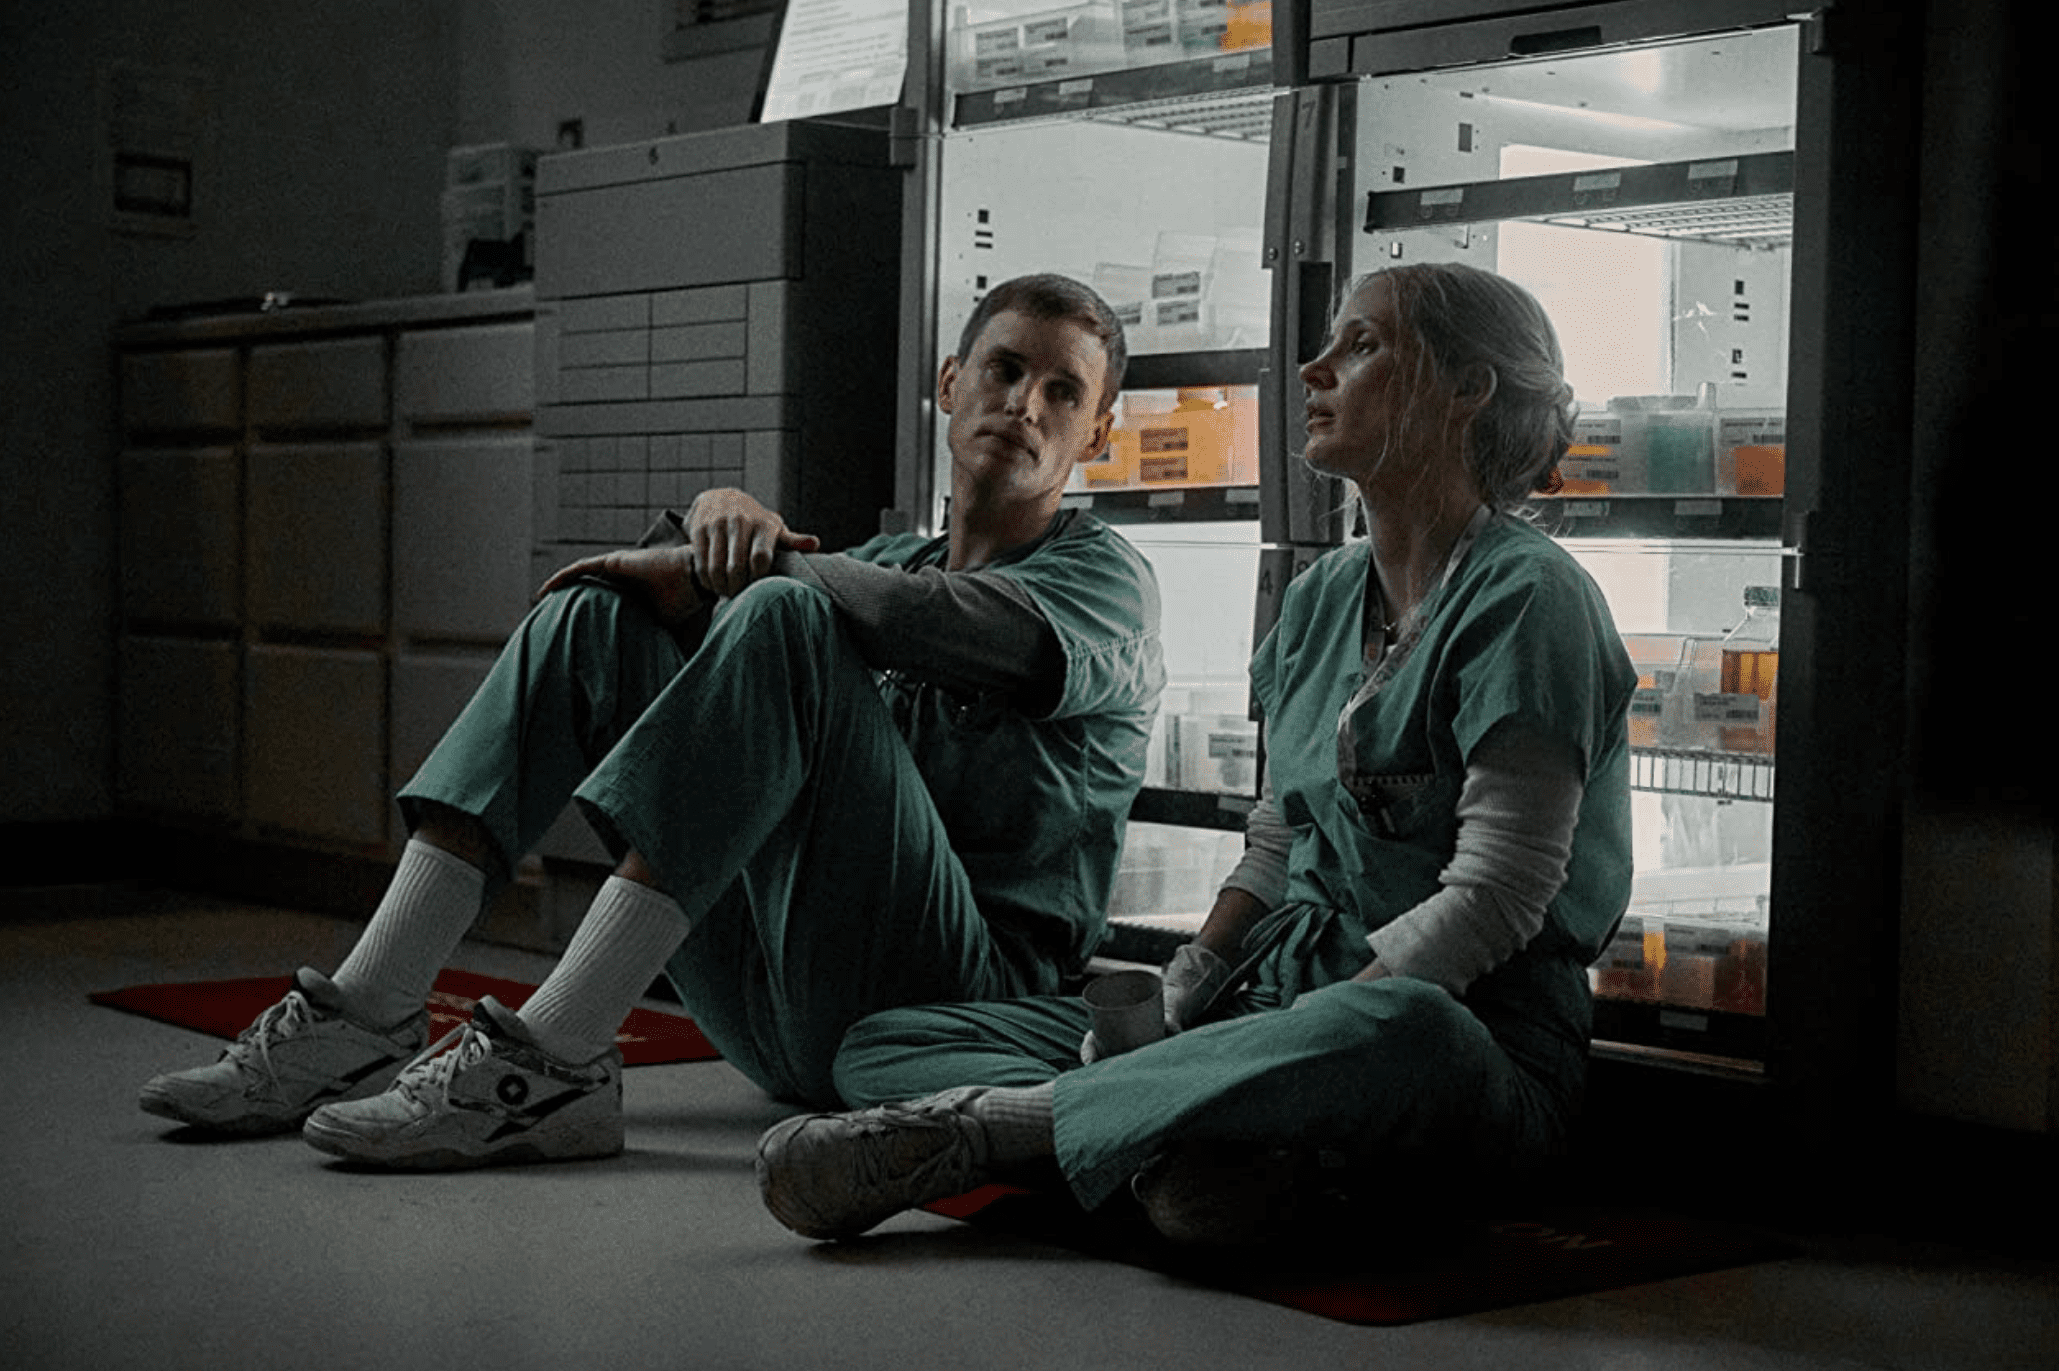 Charlie and Amy sit on the floor together in the medication storage room